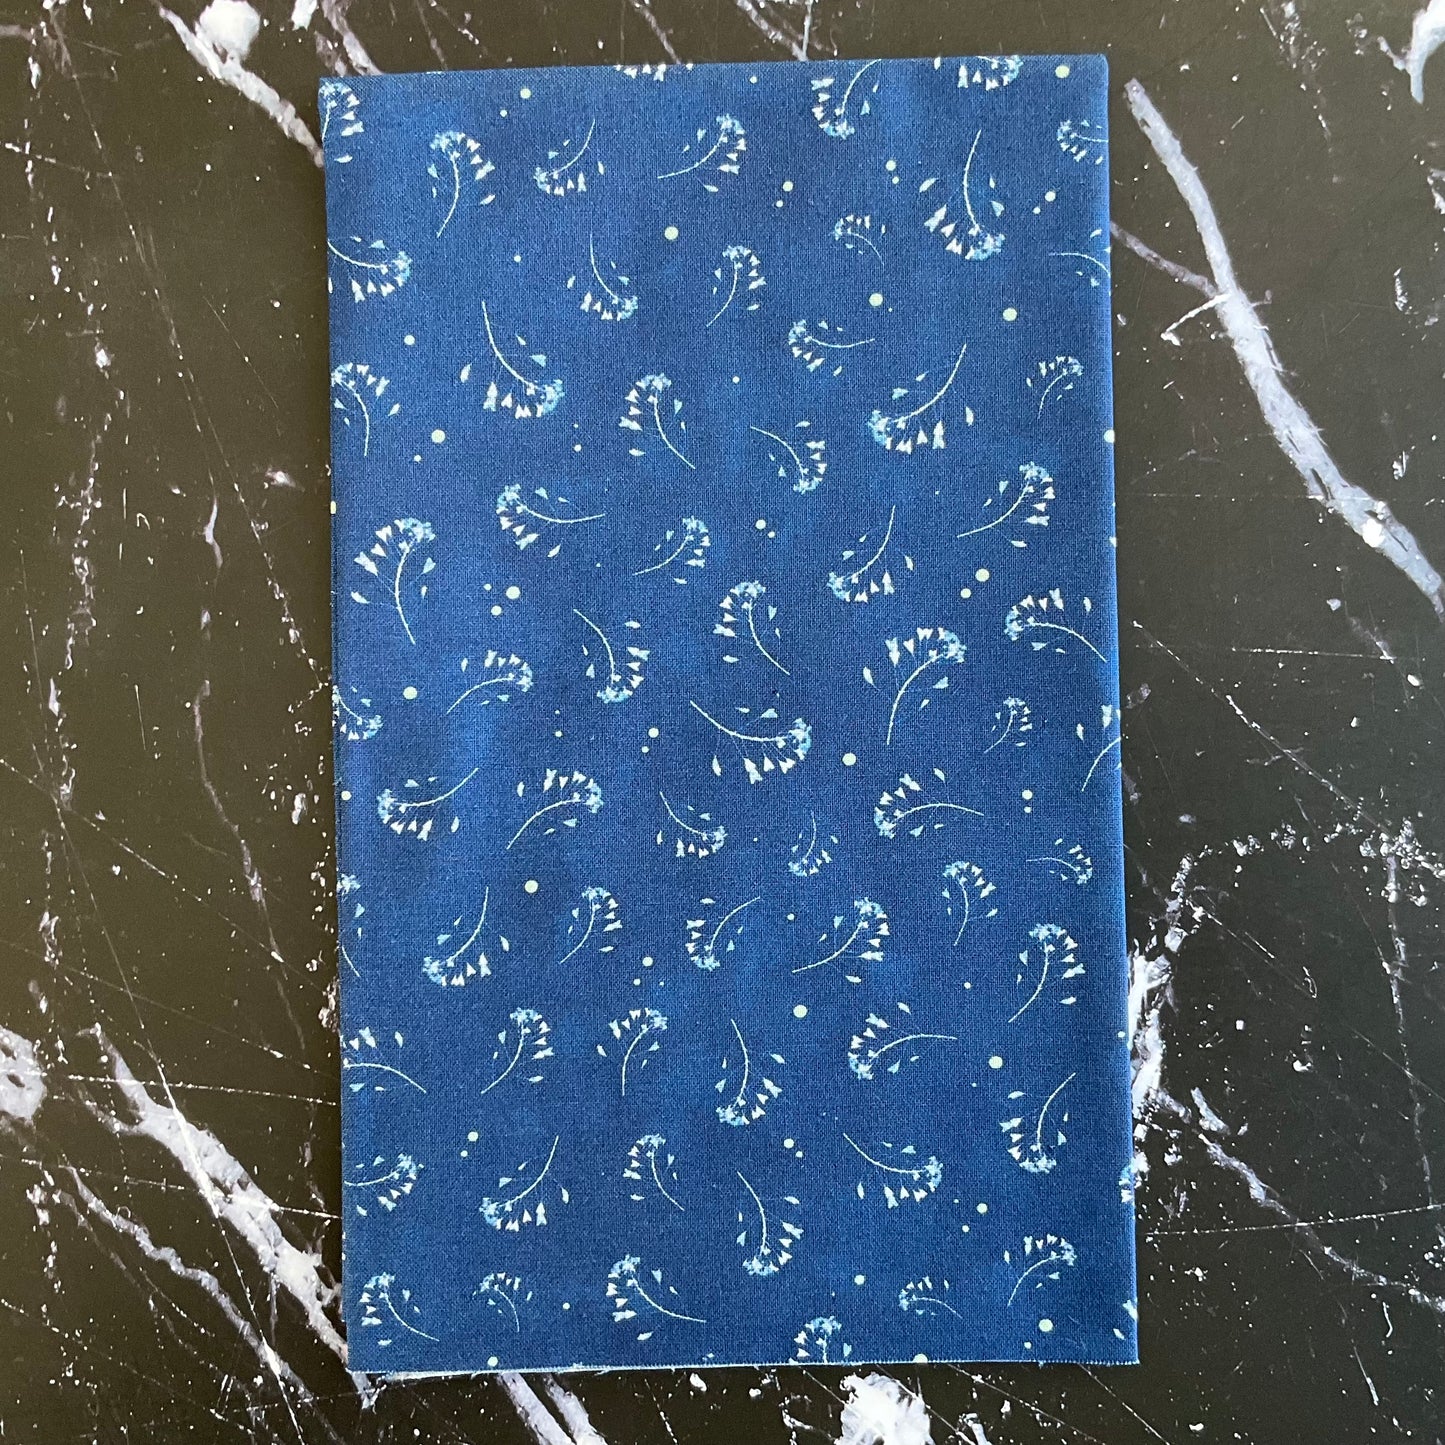 Bluebell by Janet Clare : Prussian Blue 16963 12